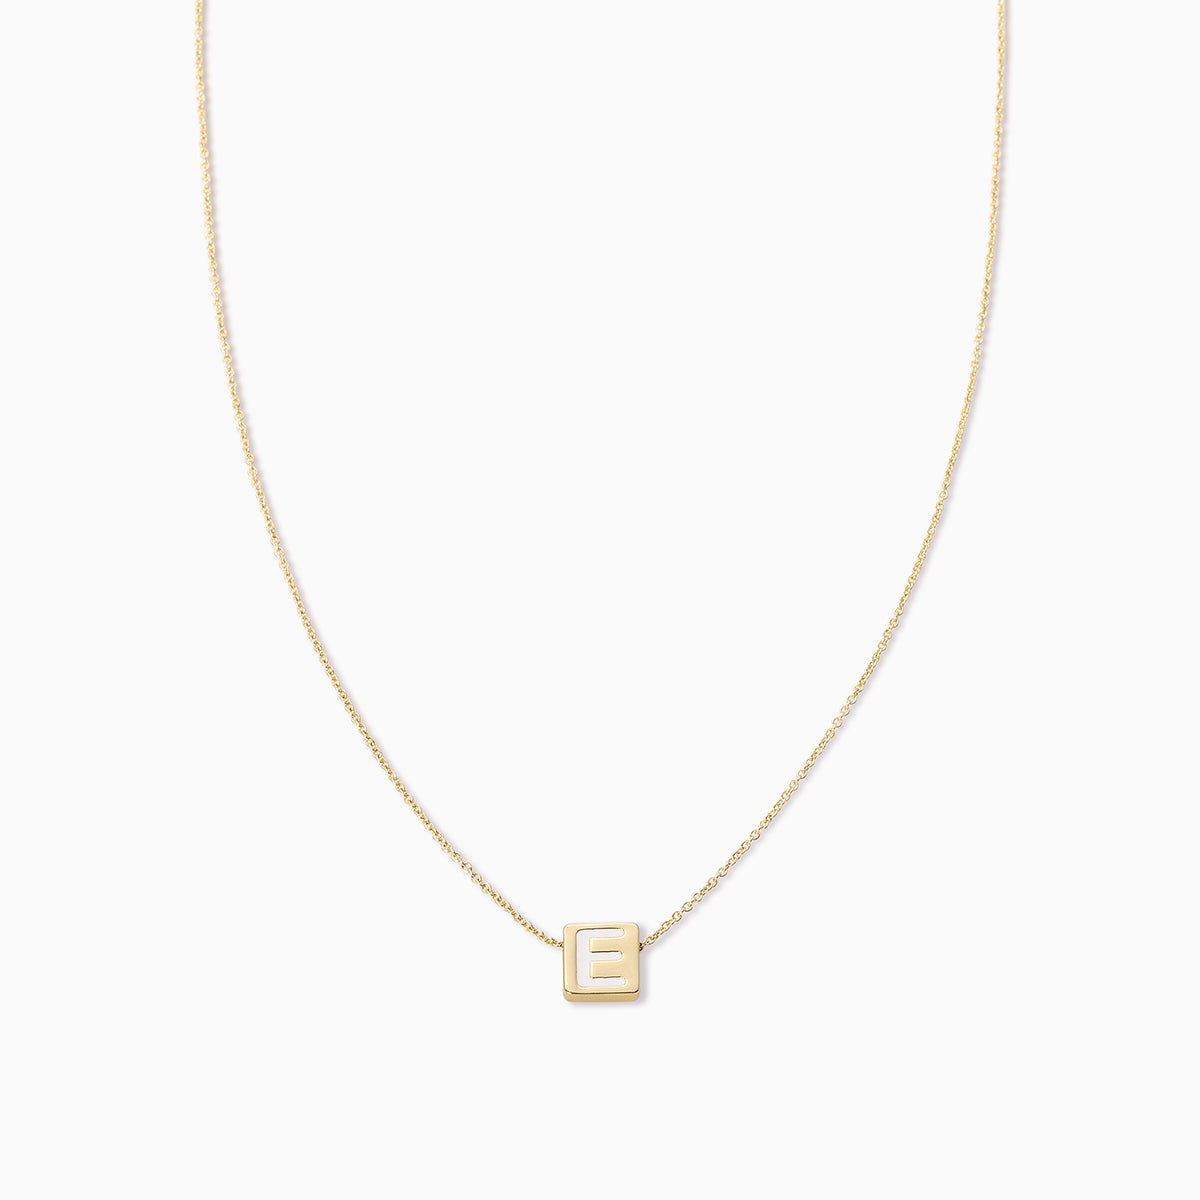 Bold Letter Necklace | Gold E | Product Image | Uncommon James